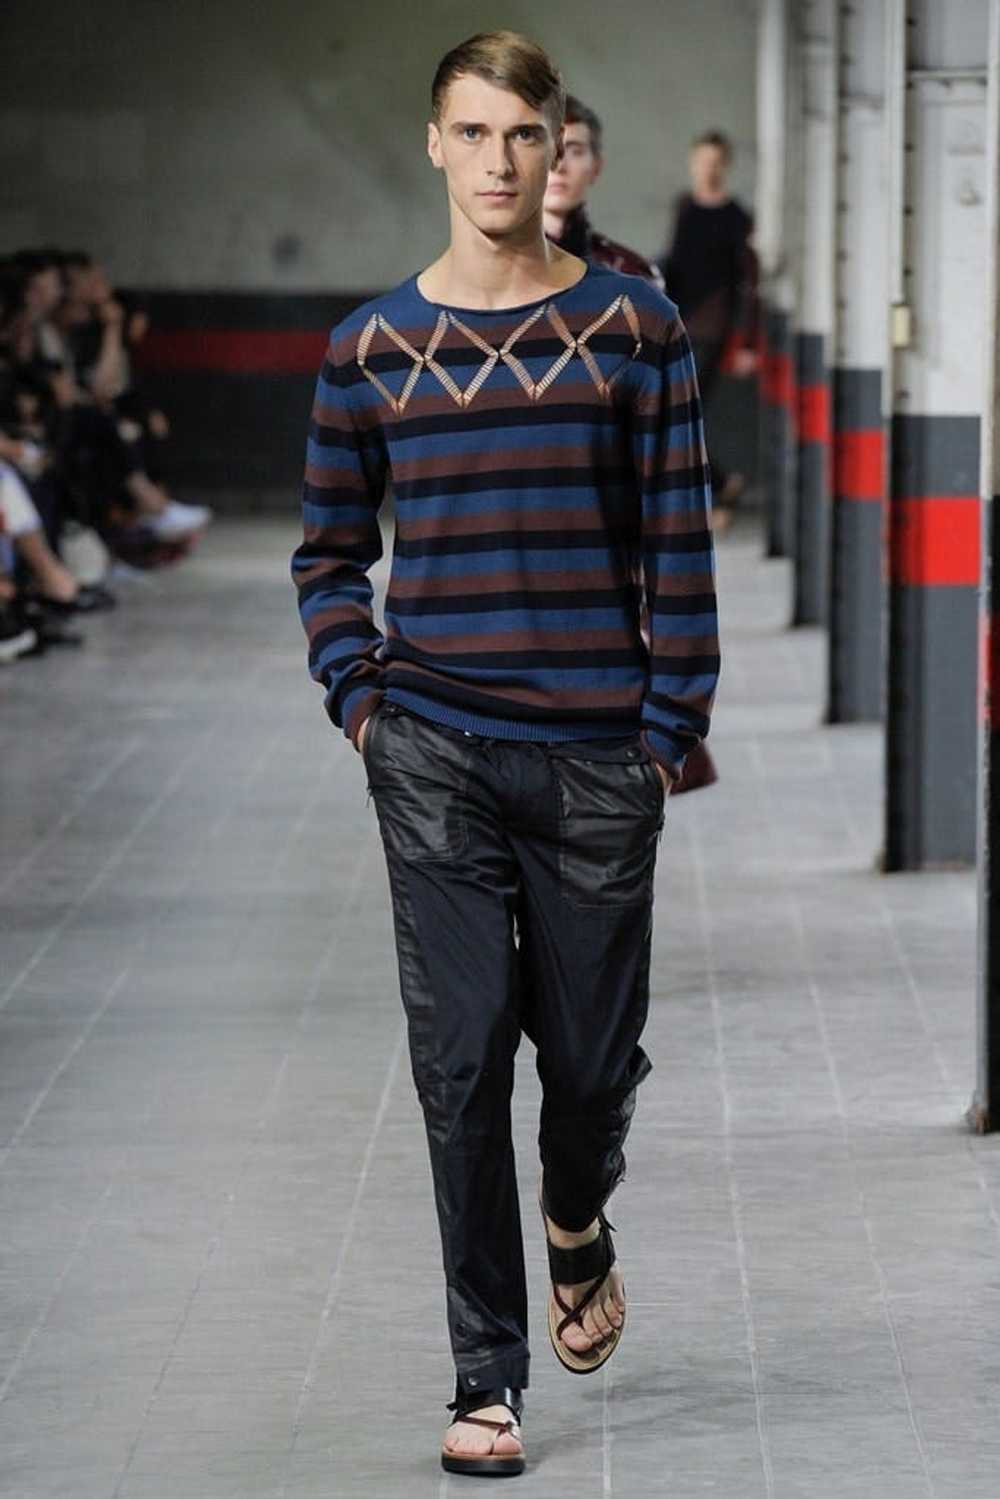 Dries Van Noten SS12 Perforated Knit Sweater - image 3